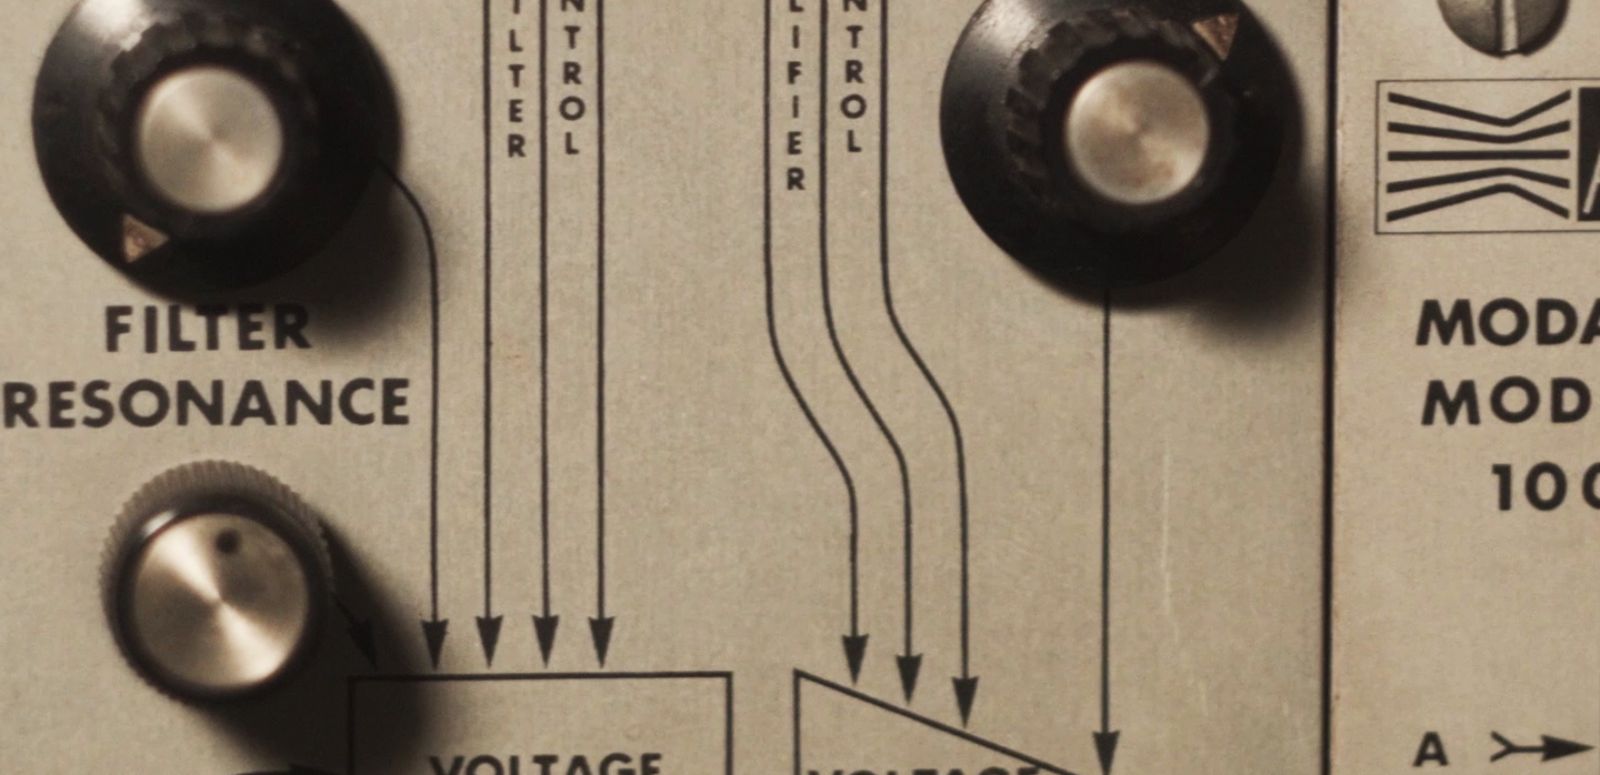 Rotary knobs of an ARP synthesizer